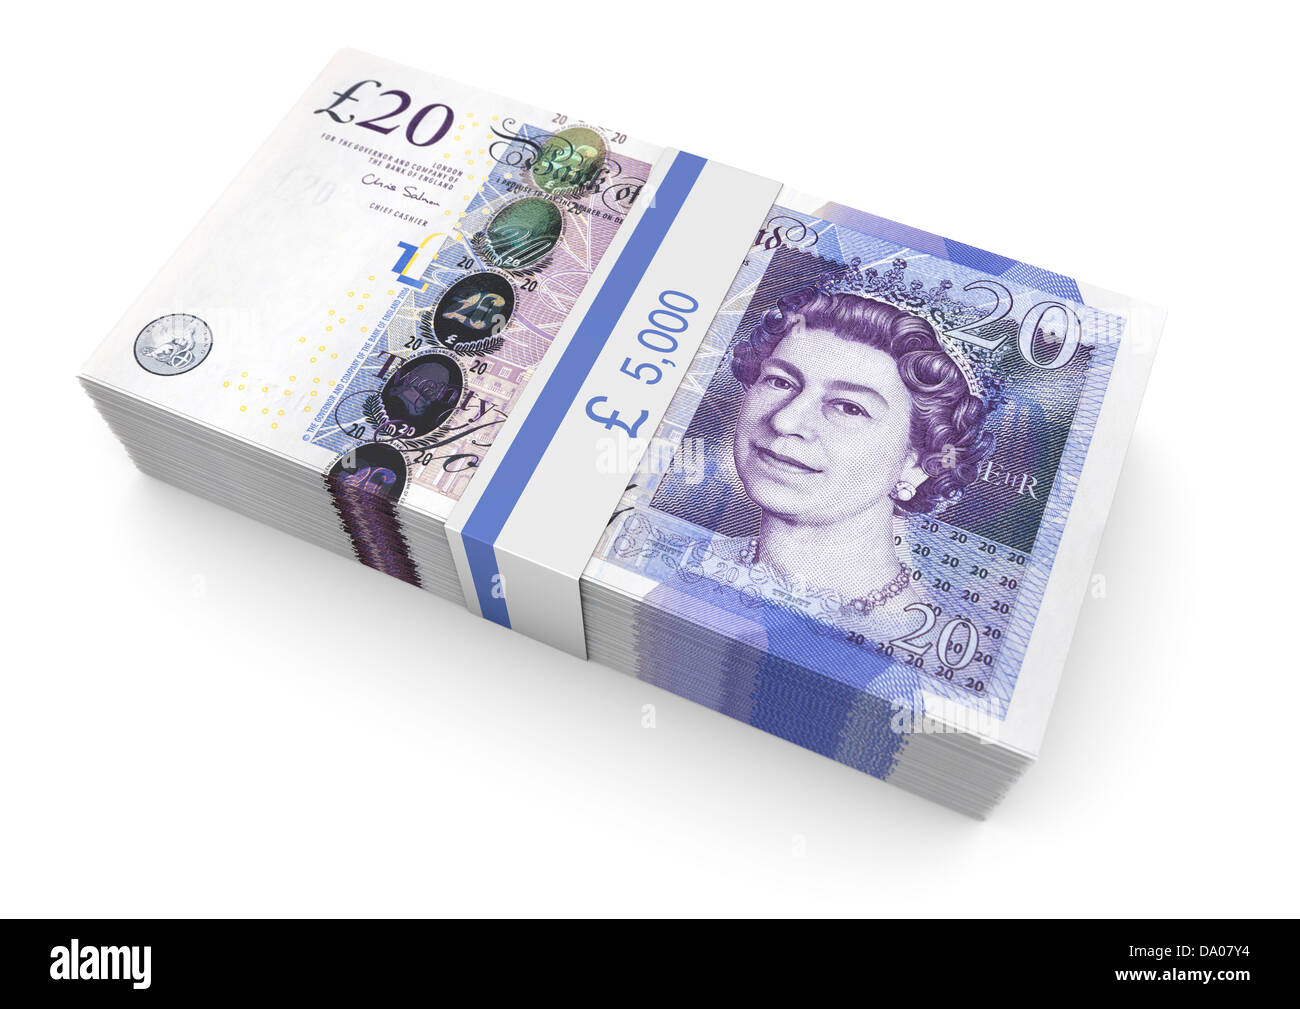 MONEY £5000 in UK Sterling £20 Notes on a white background Stock Photo